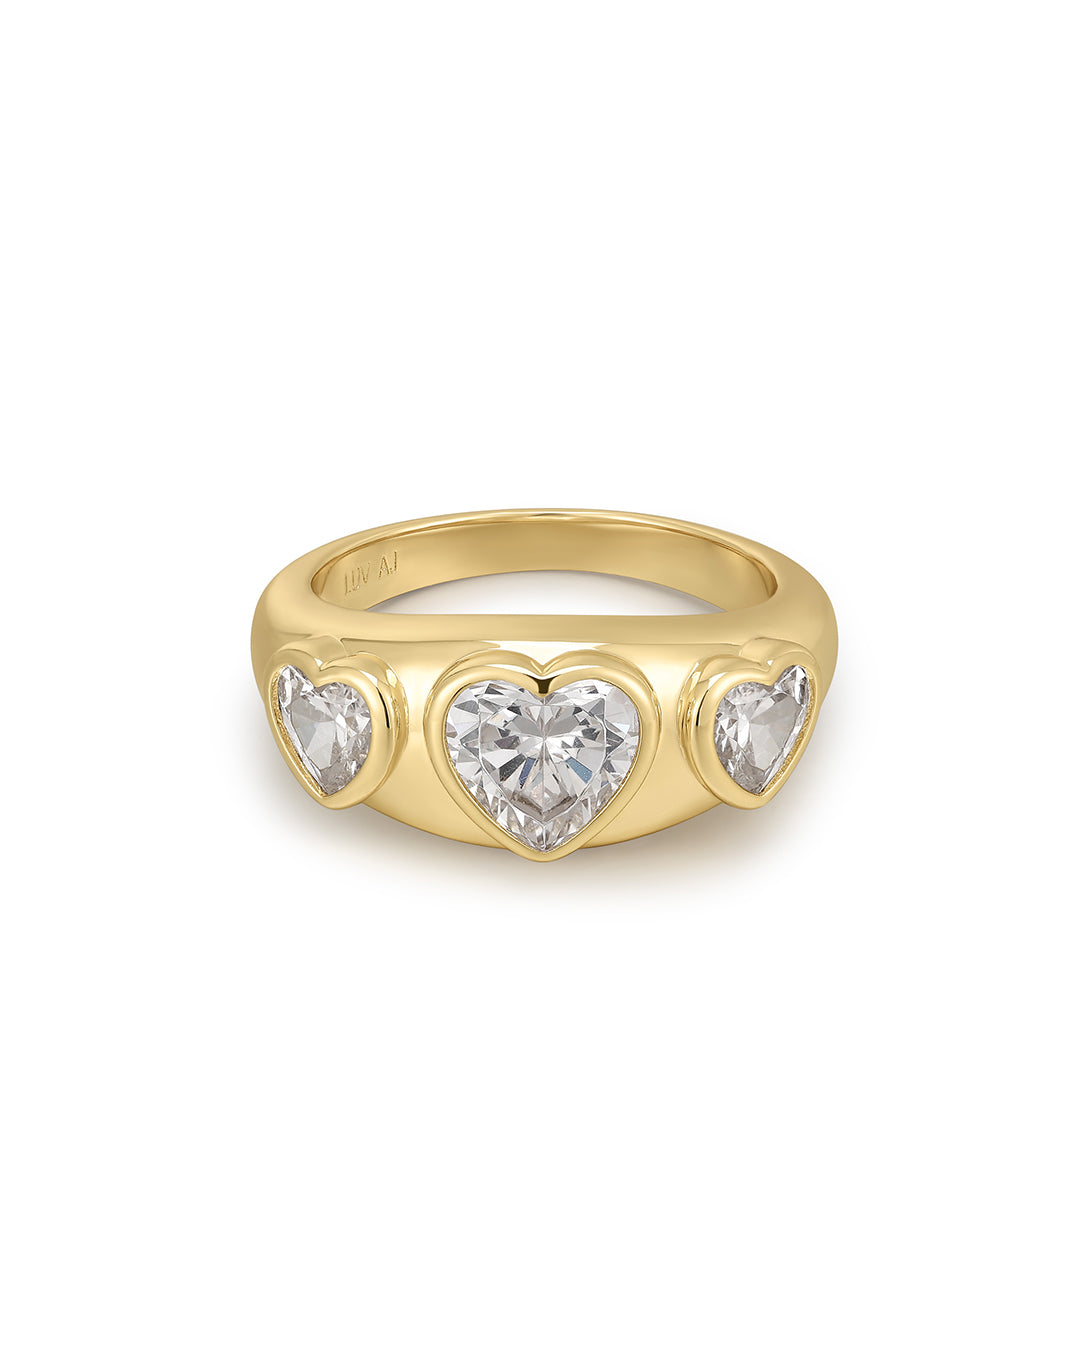 Luv Aj Bezel Heart Signet Multi Stone Ring in 14k Gold Plated in Clear CZ Size 7